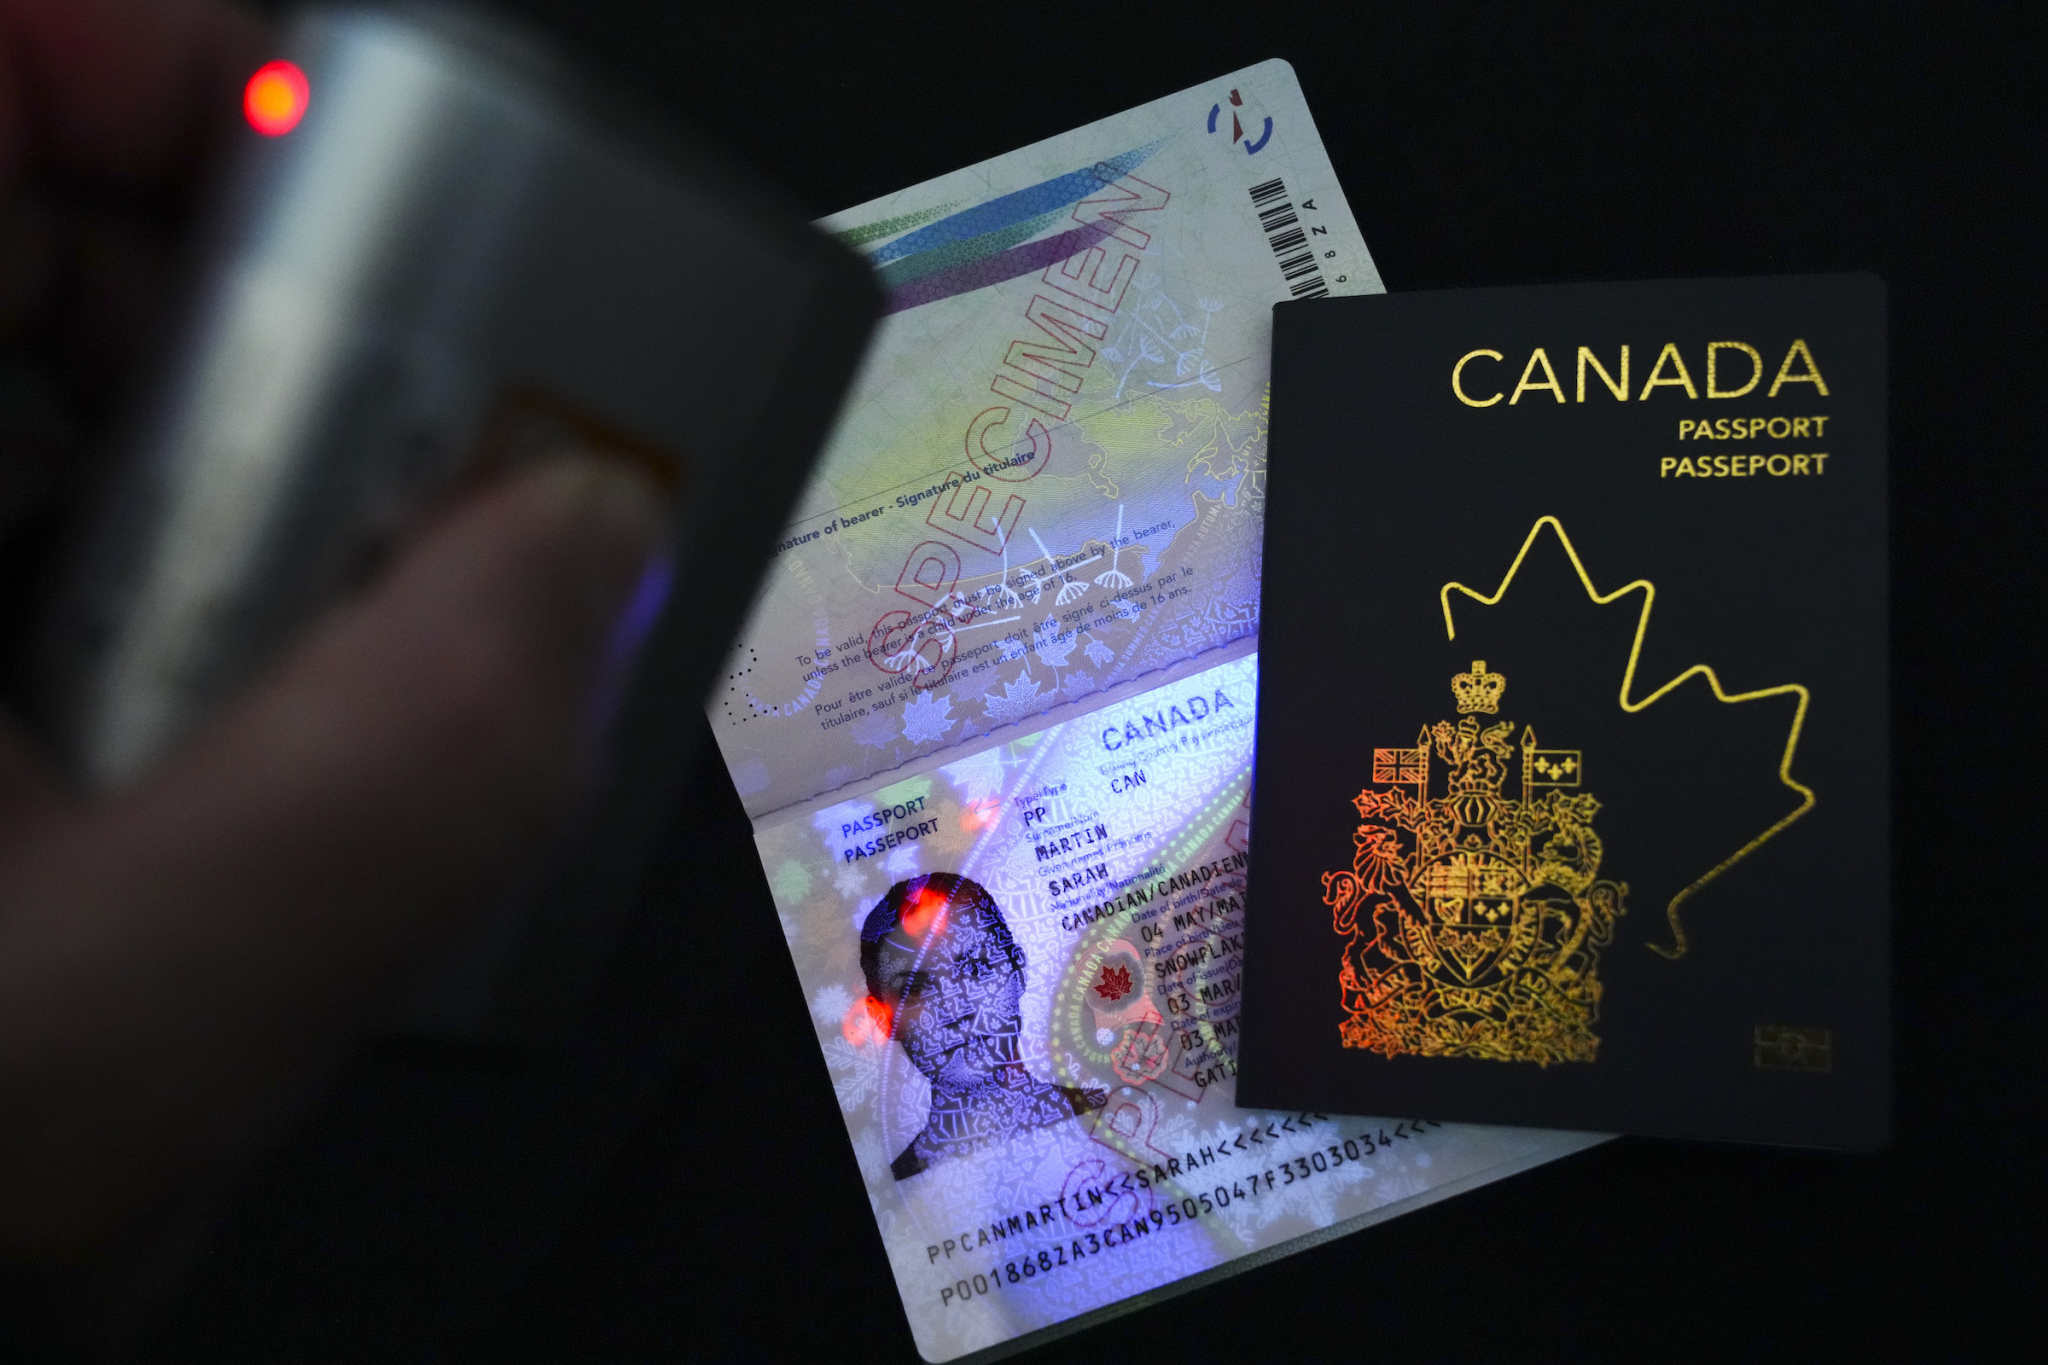 Conservative Outrage Over Canadas Modernized Passports Is Just More